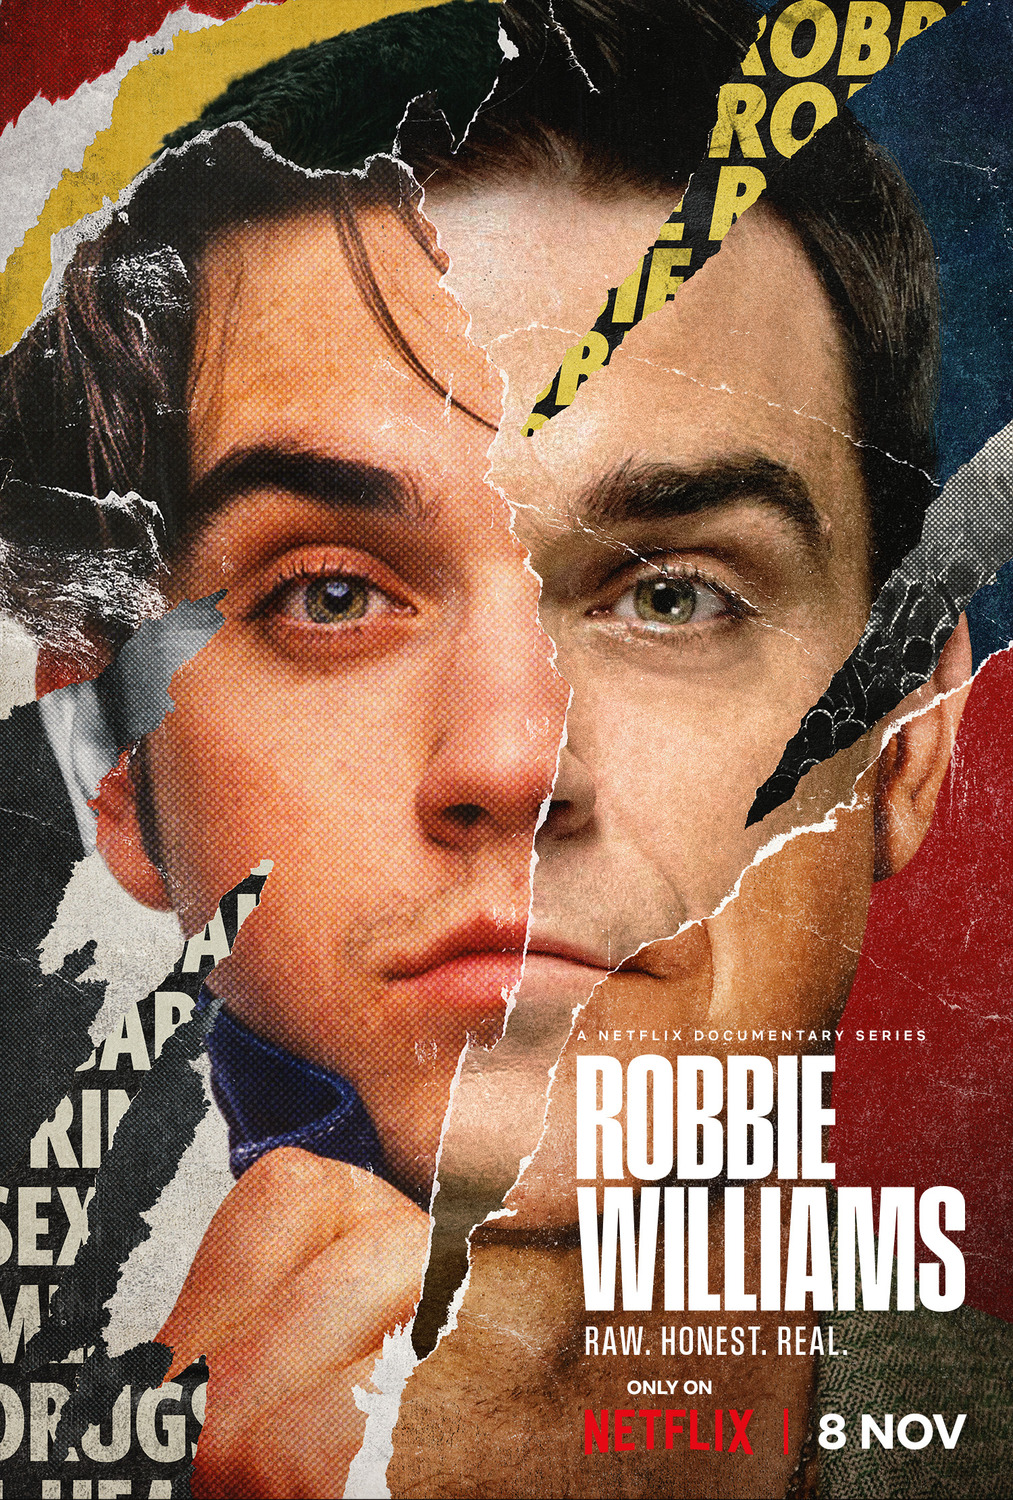 Extra Large TV Poster Image for Robbie Williams 